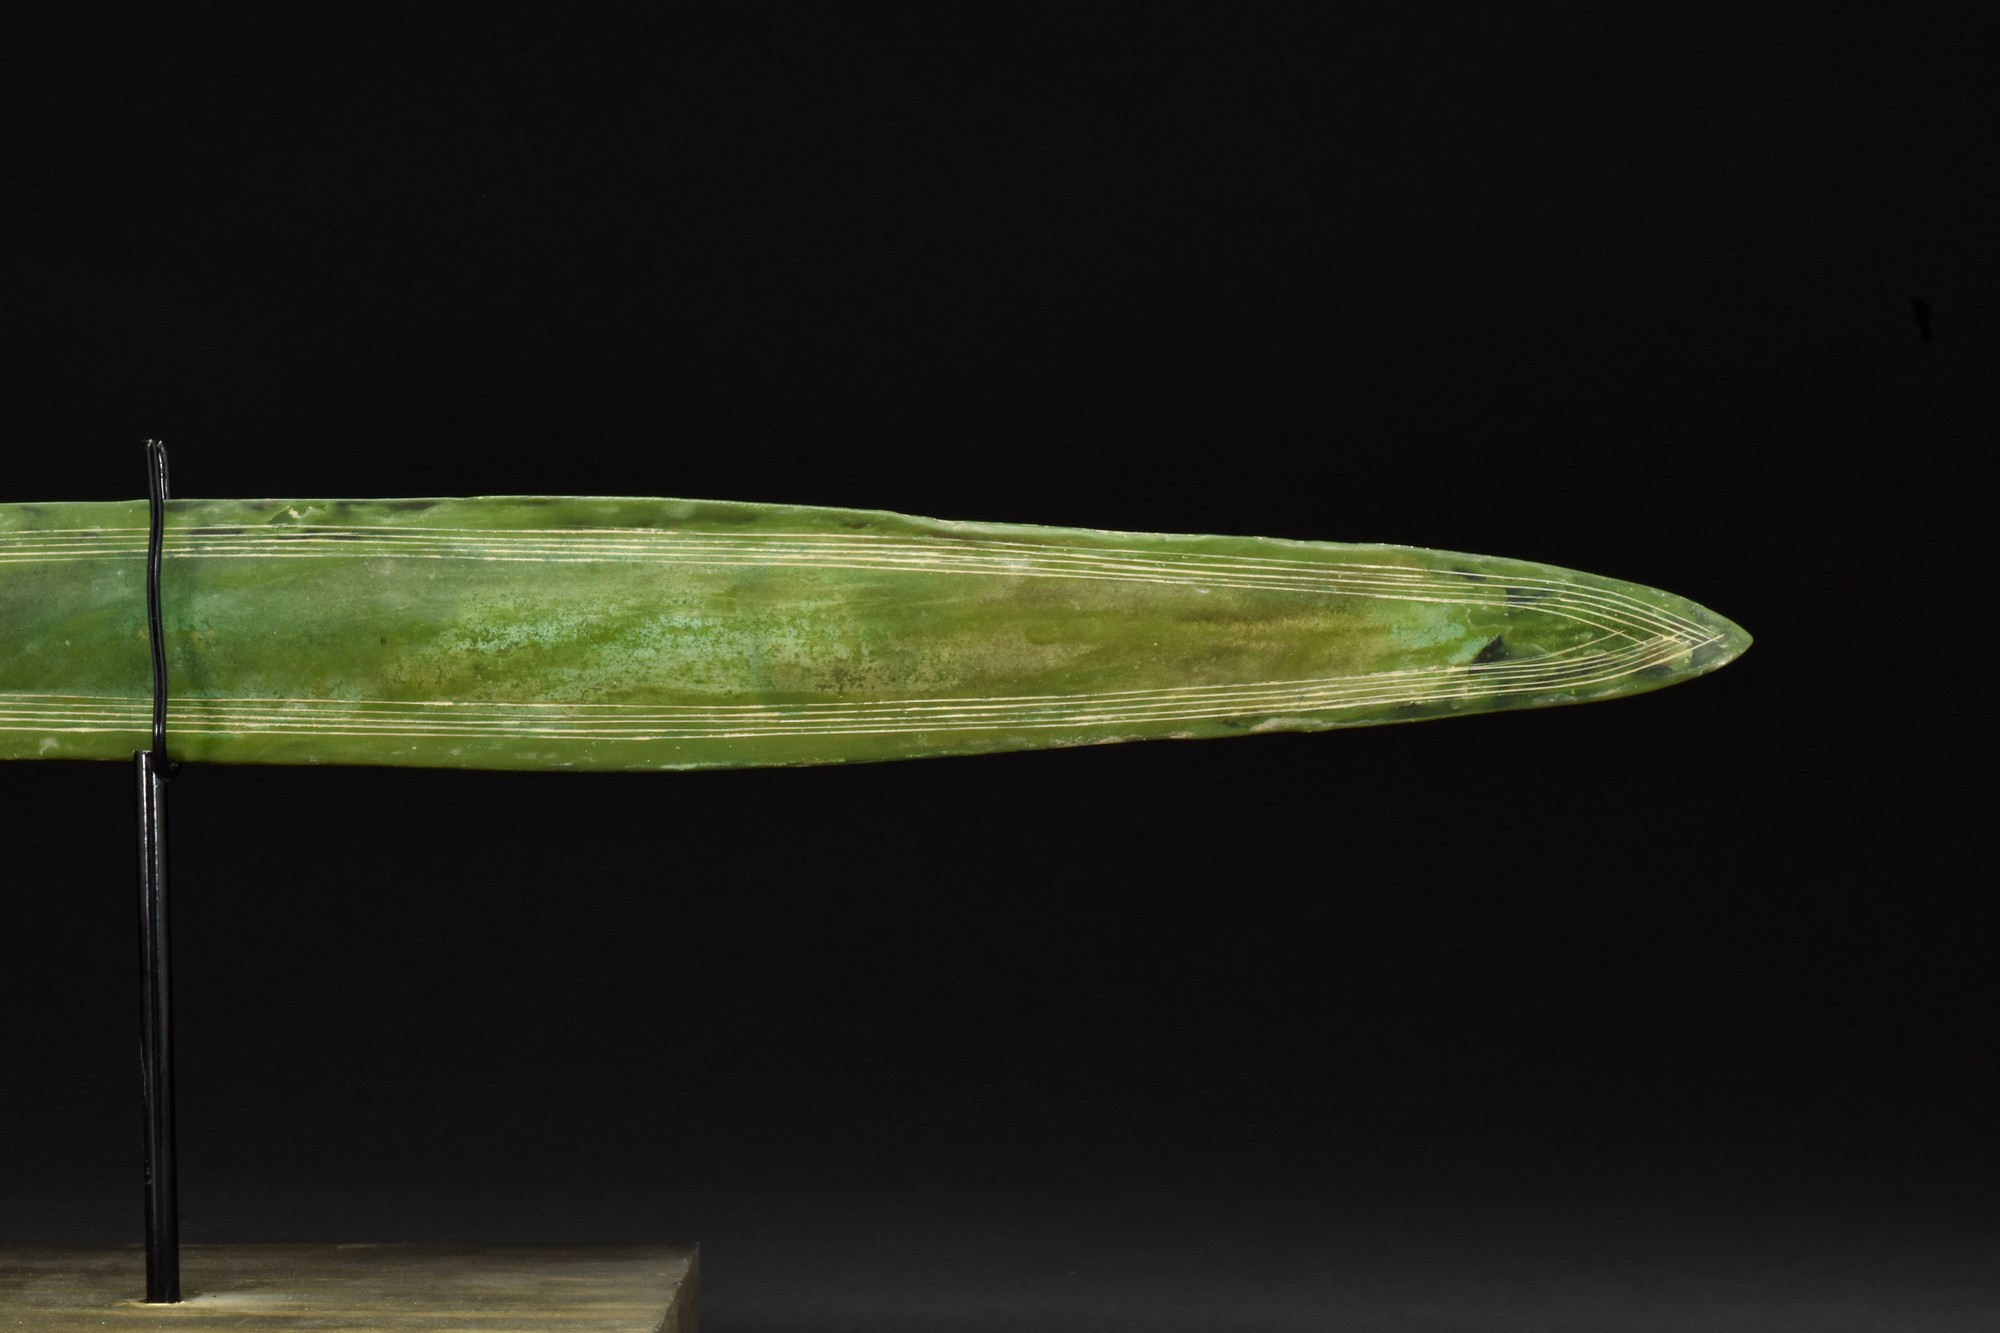 ELABORATE CELTIC BRONZE AGE SWORD WITH HANDLE - Image 5 of 5